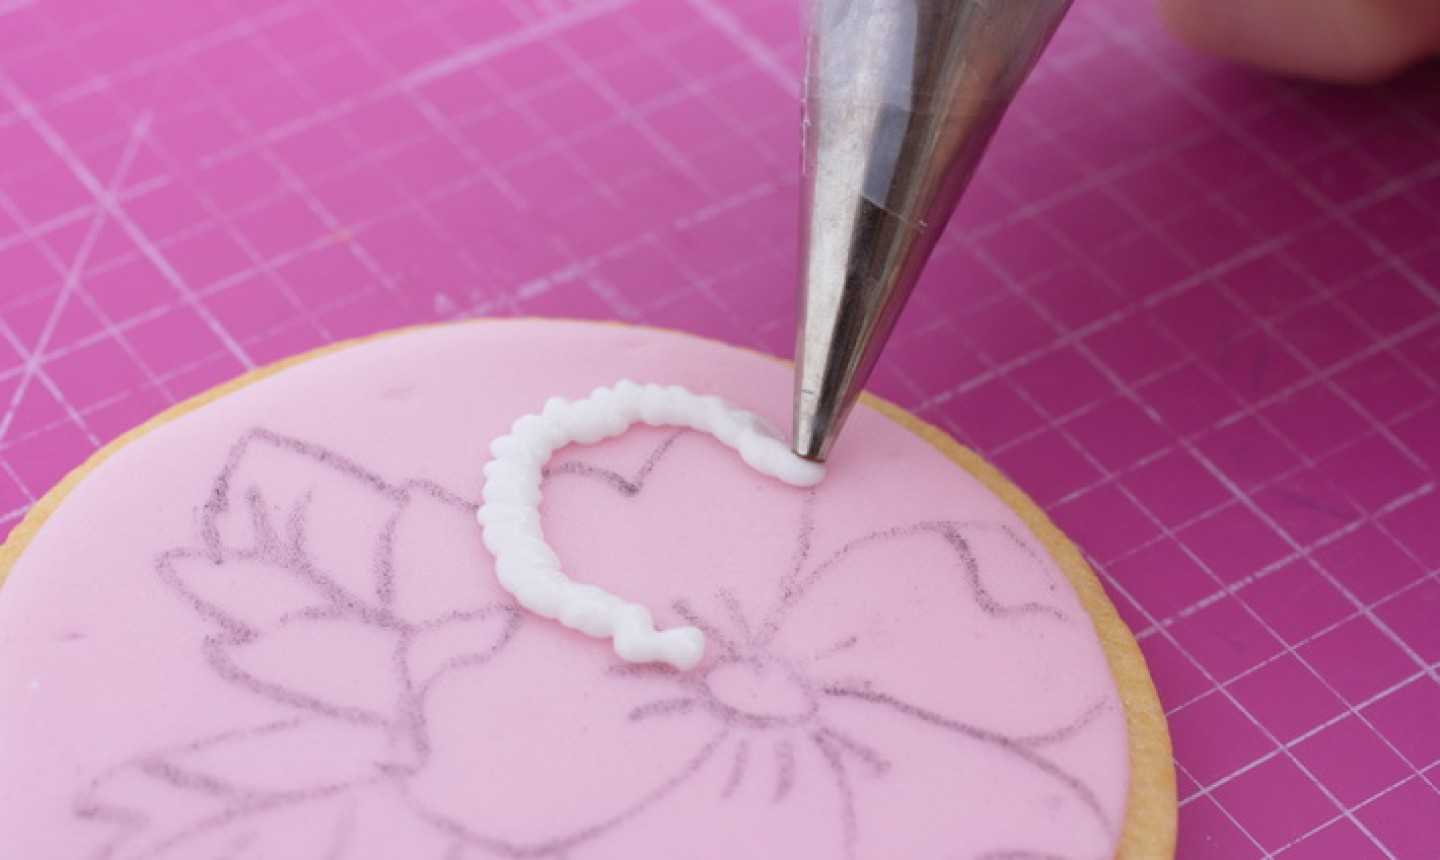 Brush Embroidery Patterns Lace Up Yes Embroidery Effects On Cookies Are A Thing